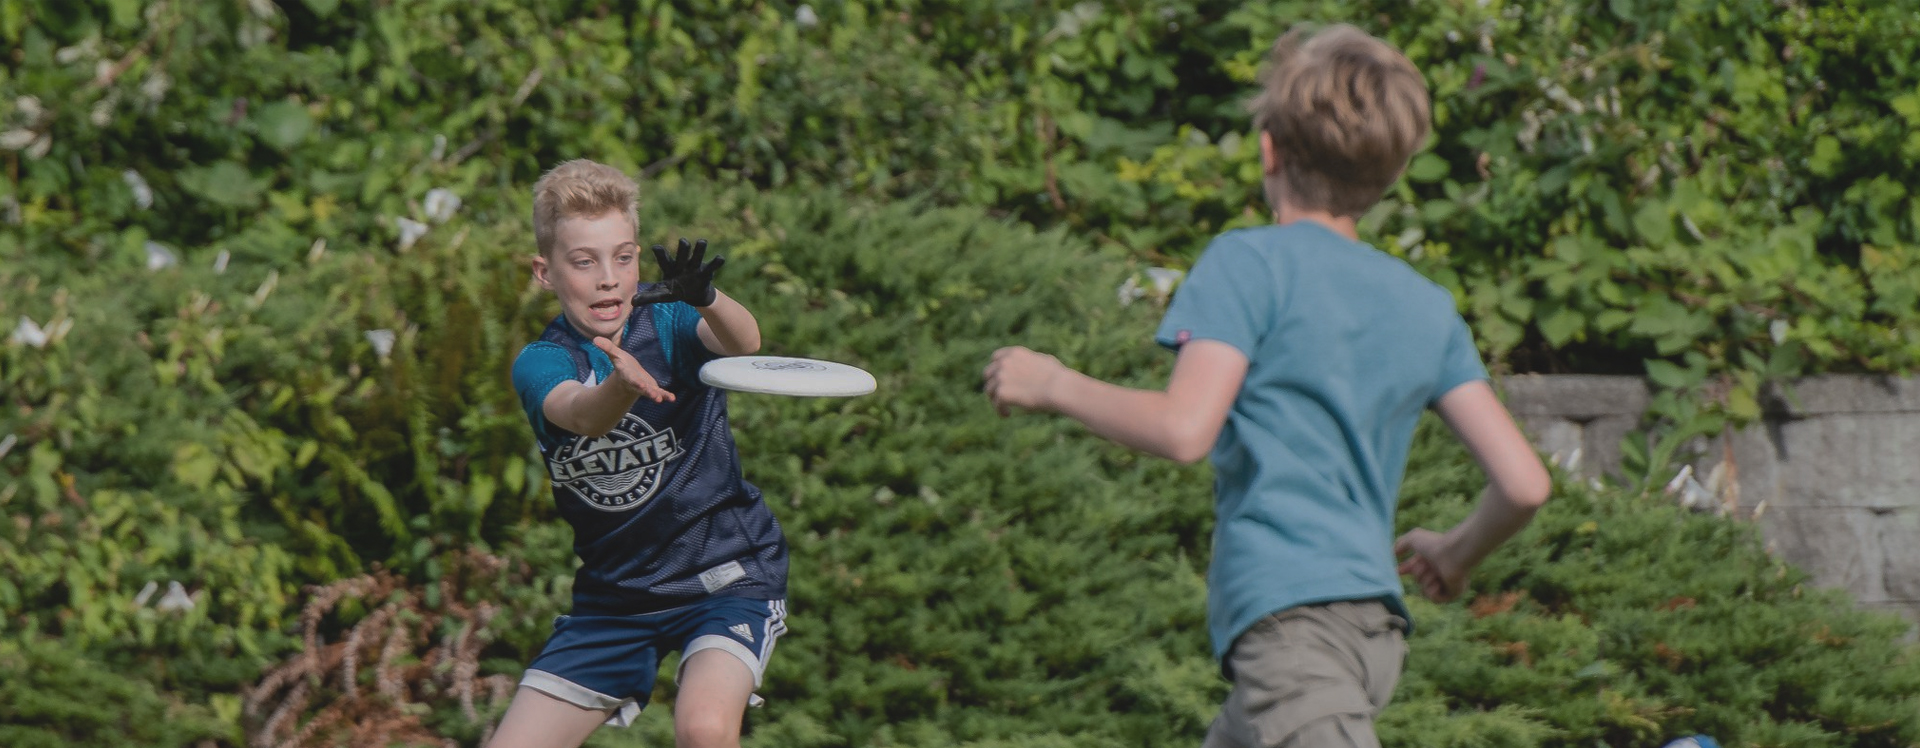 Elevate Ultimate  Ultimate frisbee training for Kids in Vancouver